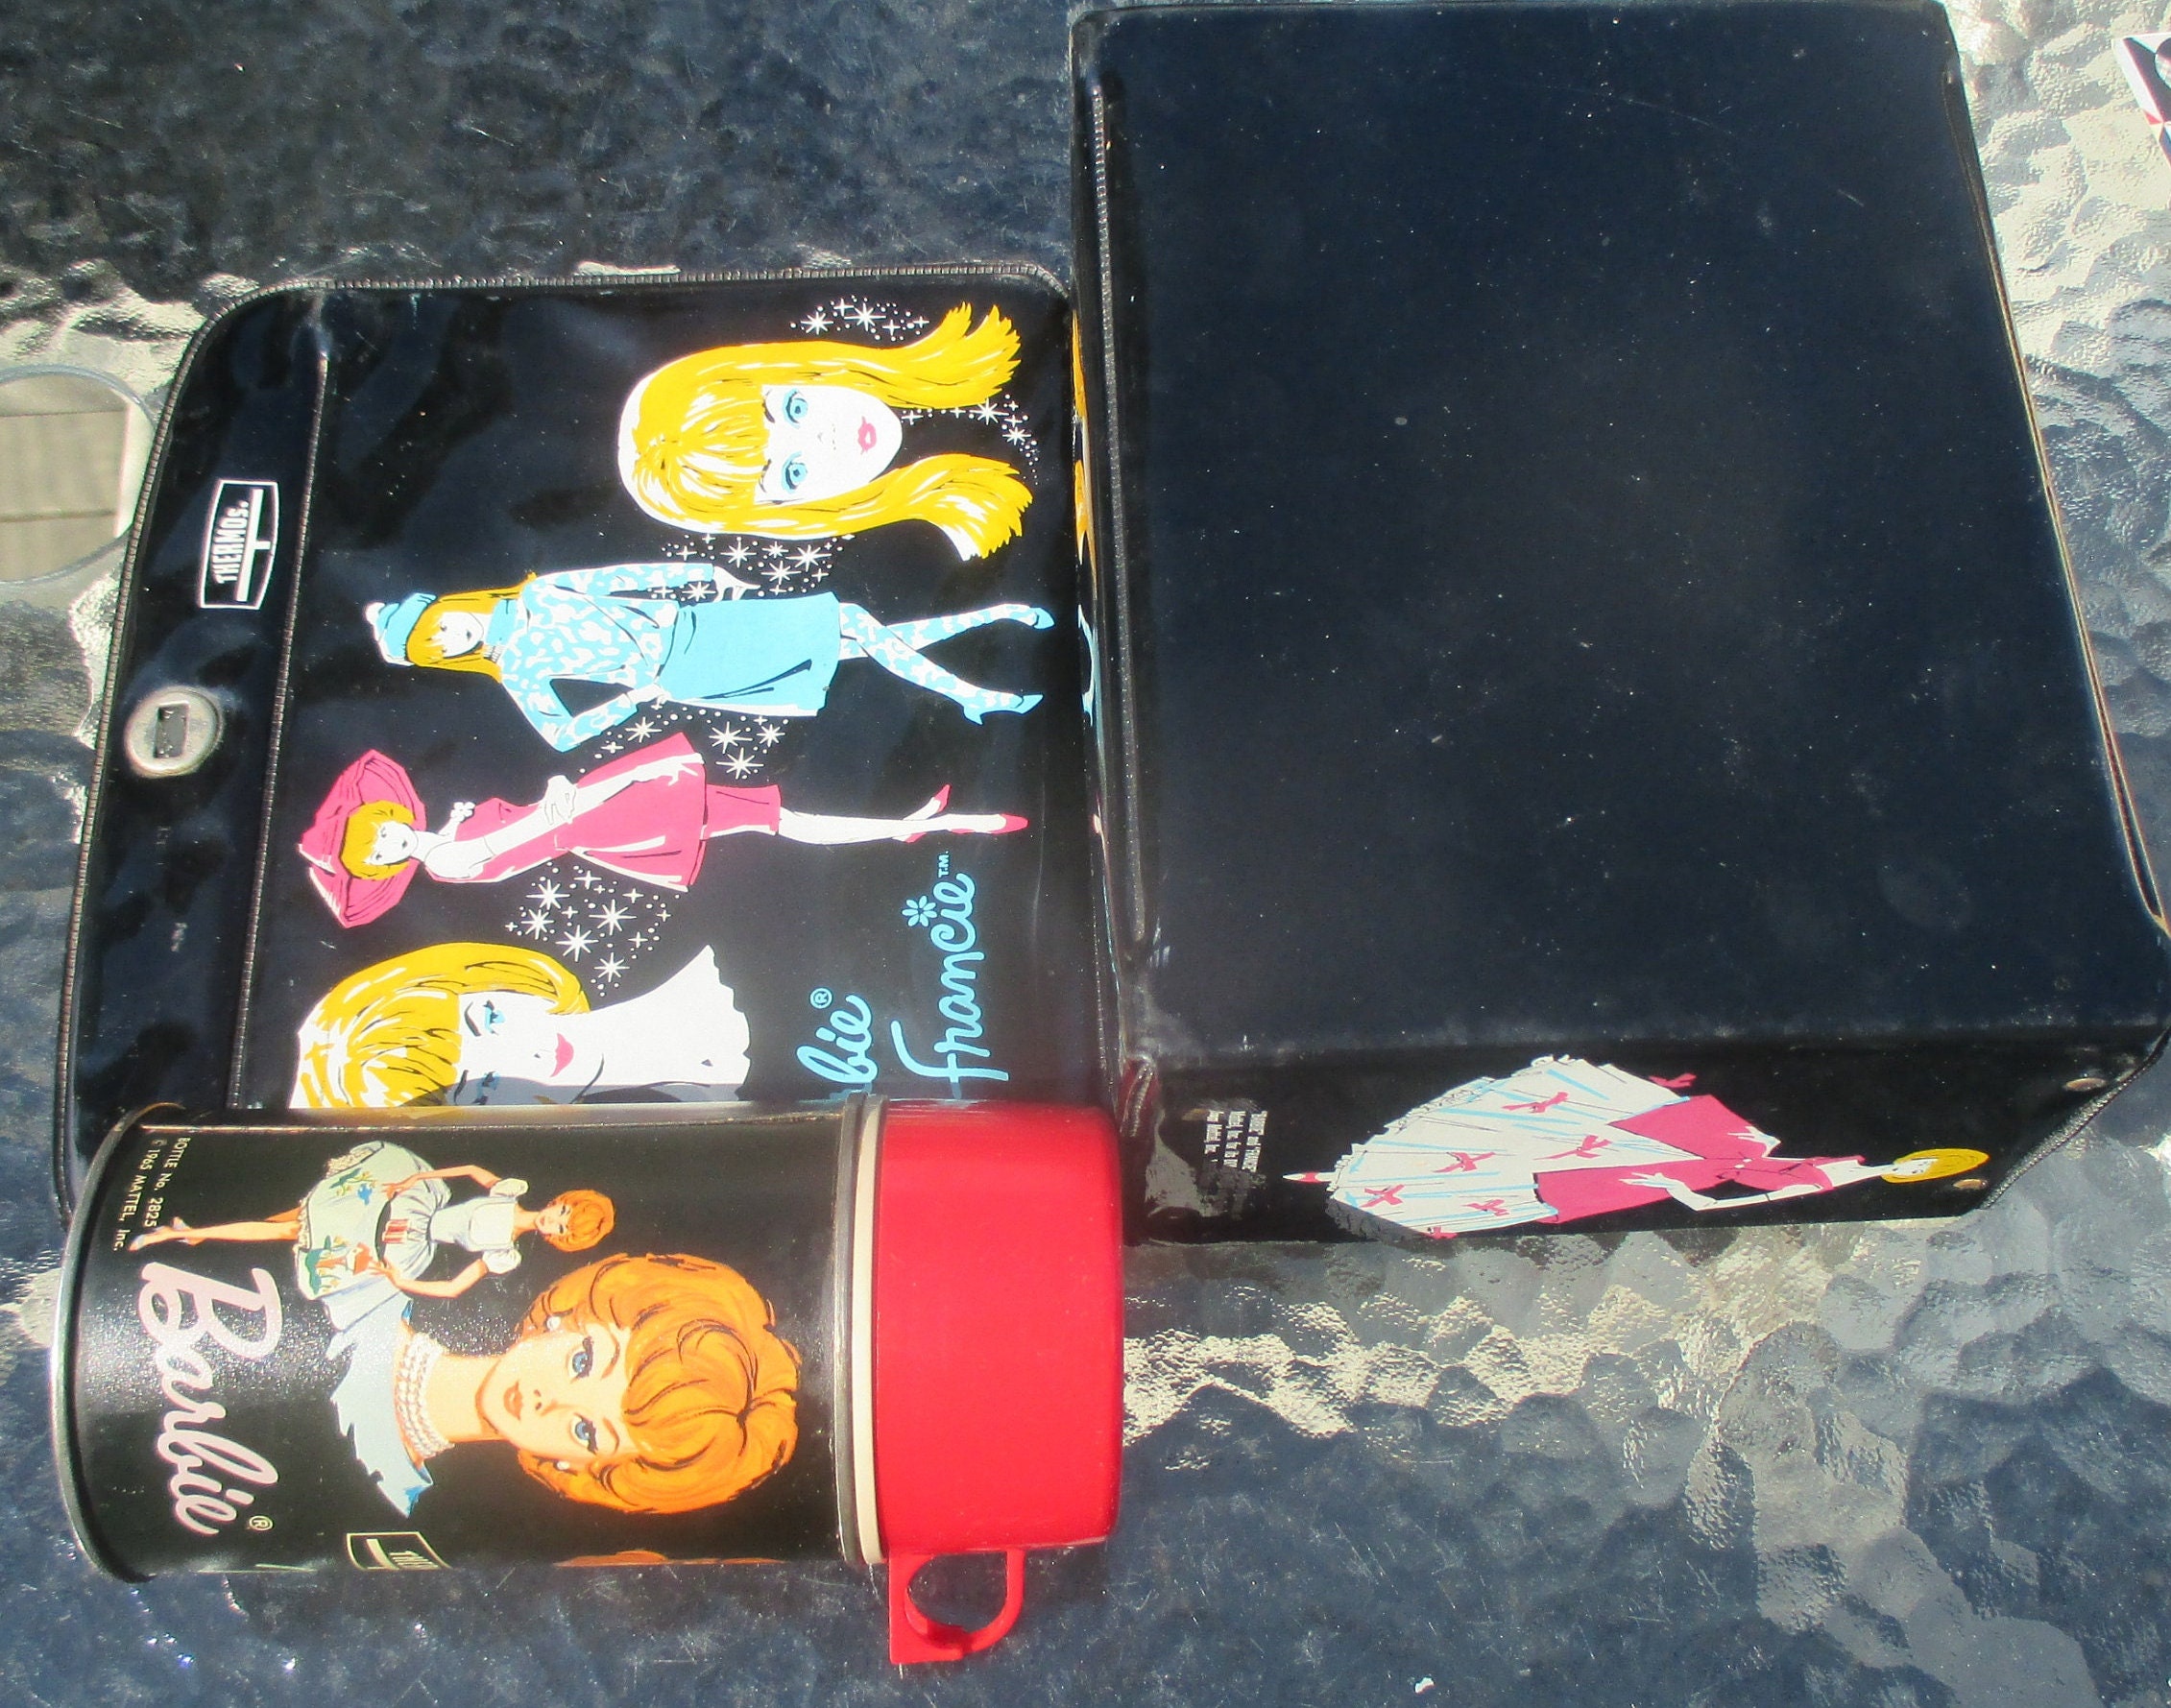 Vintage 90’s Plastic Lunch box With Thermos Barbie & My Wonderful Friend  Theresa